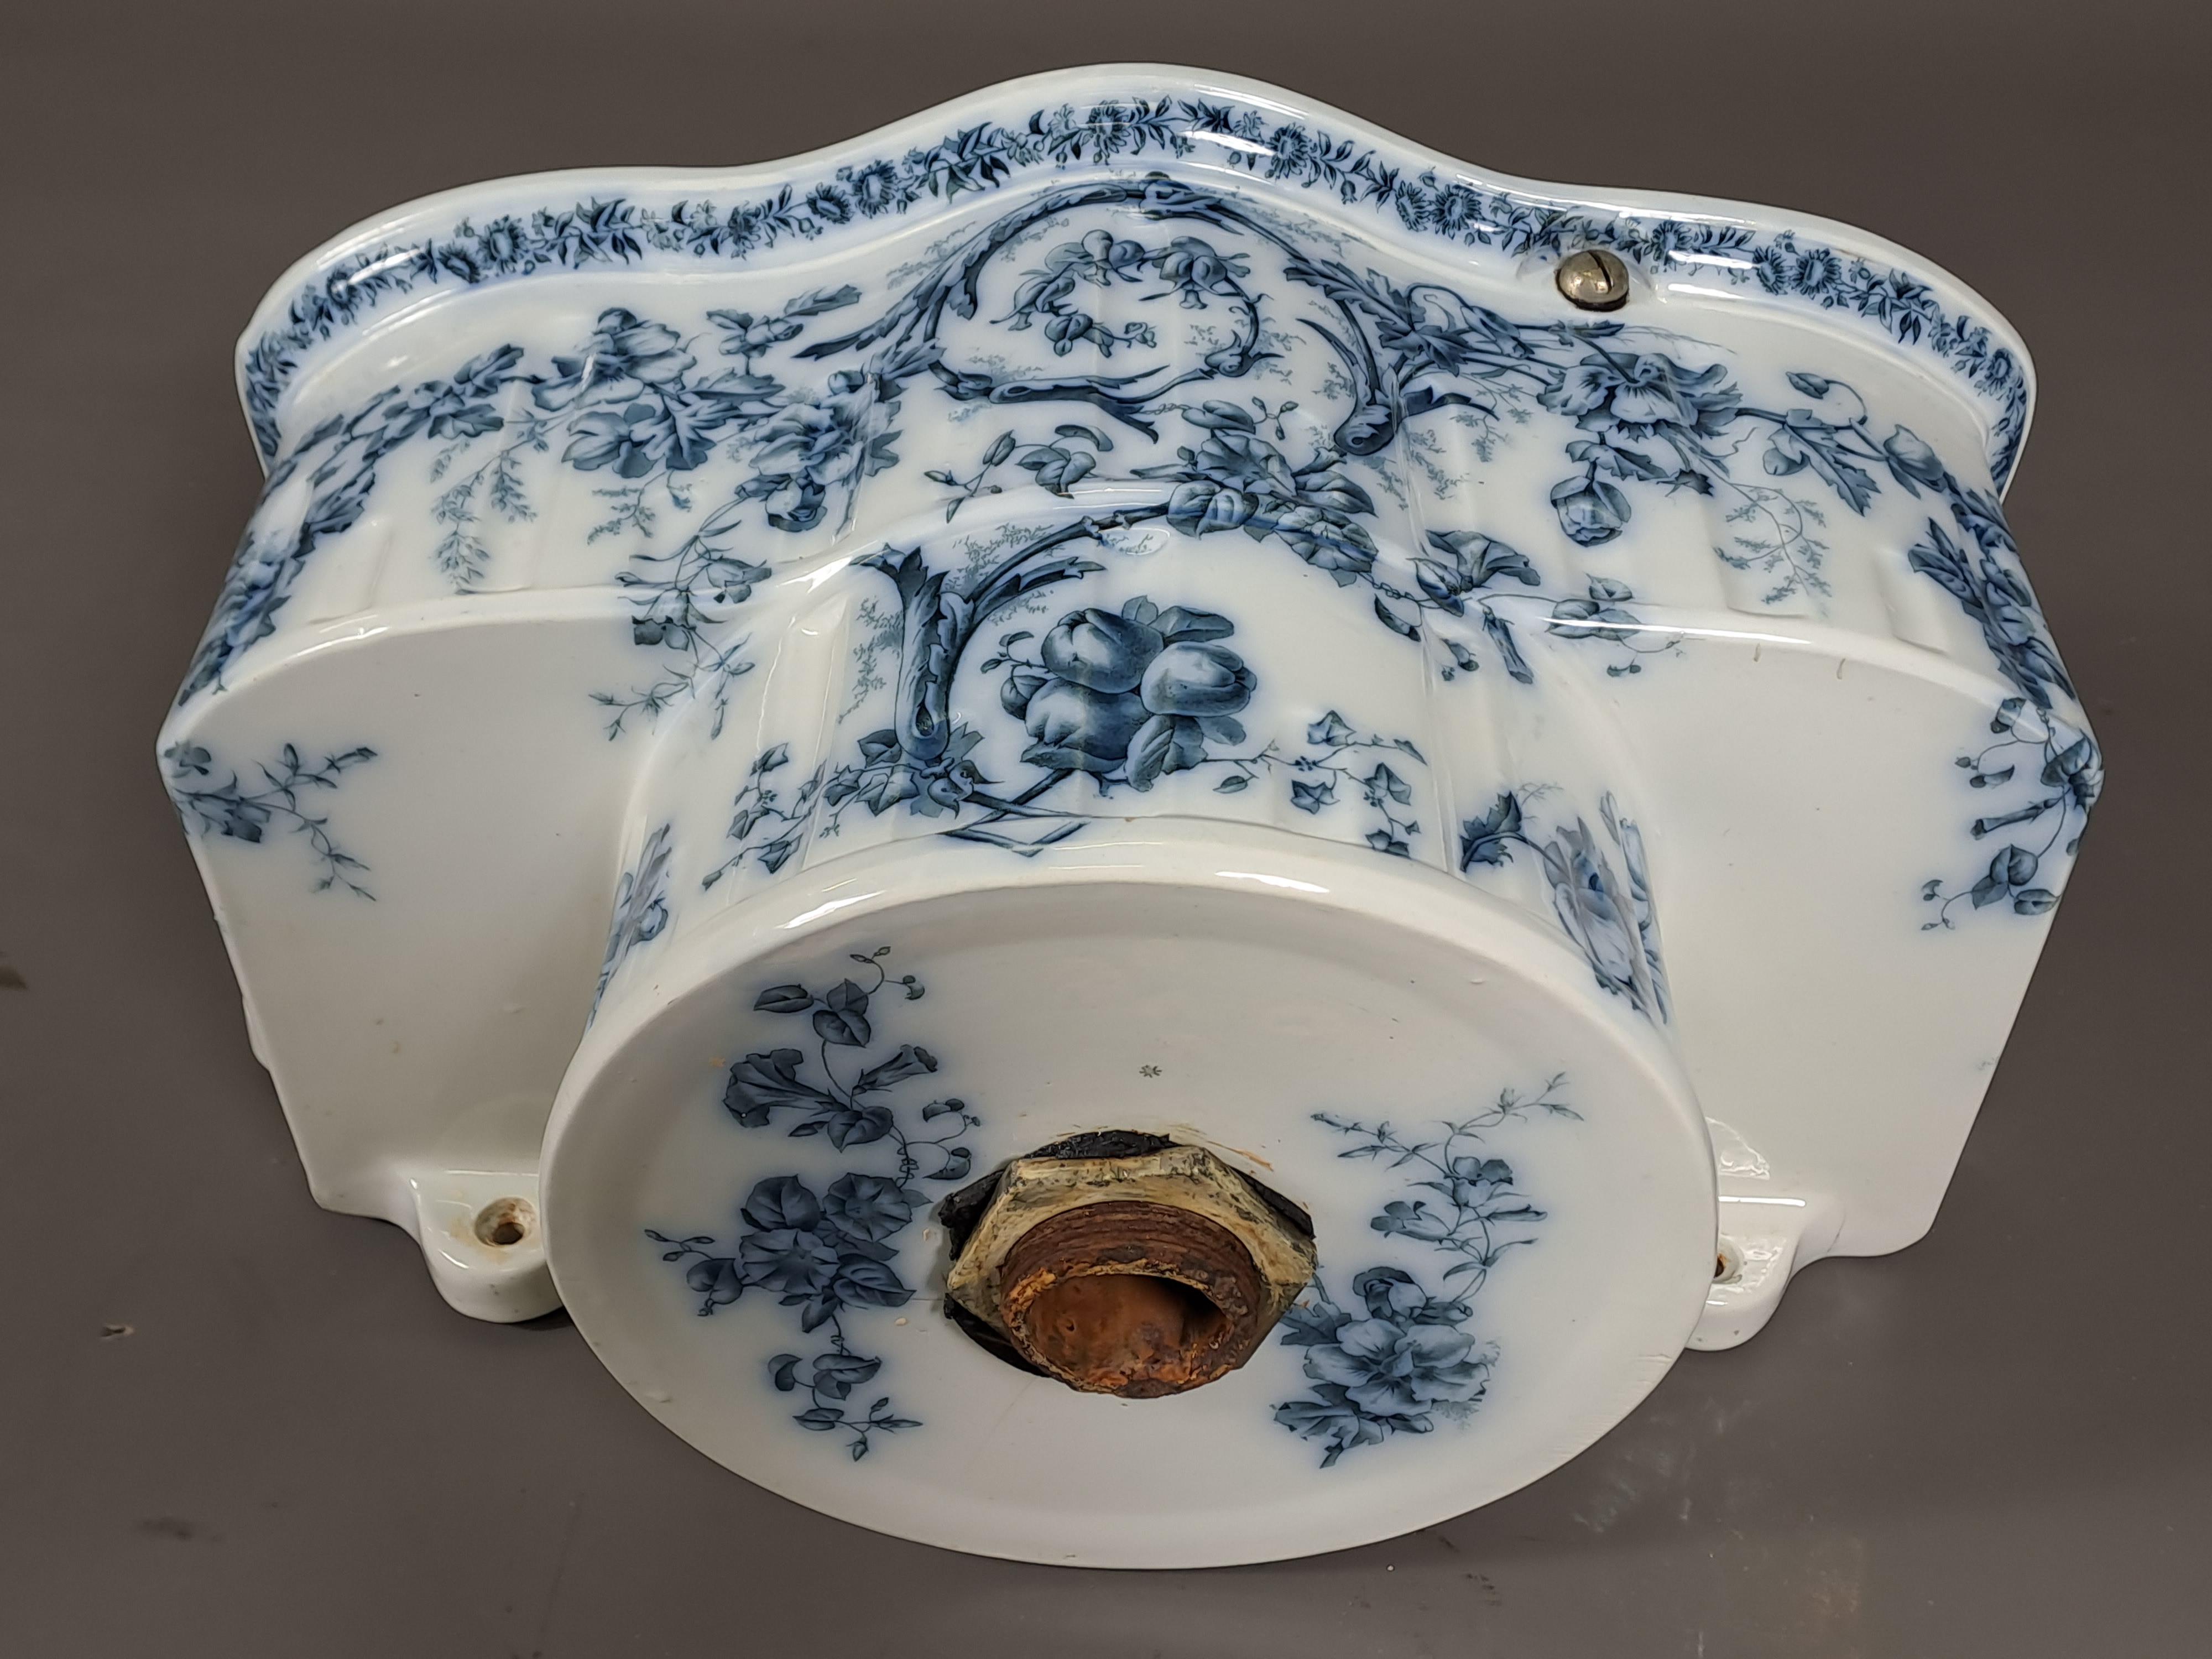 Abalone Rare Old Toilet Tank And Its Soap Dish In Fine English Porcelain